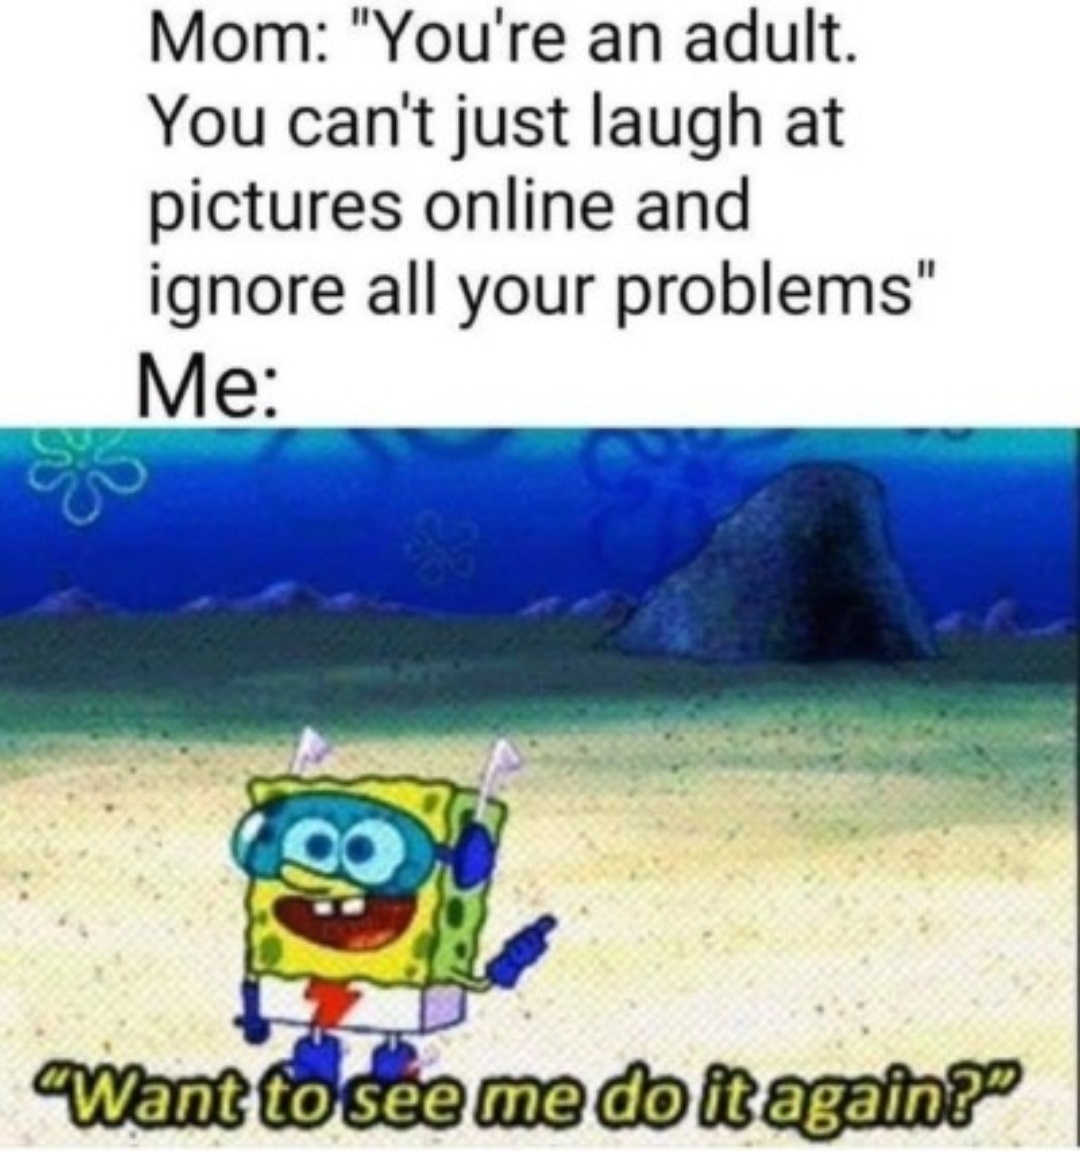 memes - funny dank memes 2019 - Mom "You're an adult. You can't just laugh at pictures online and ignore all your problems" Me Want to see me do it again?